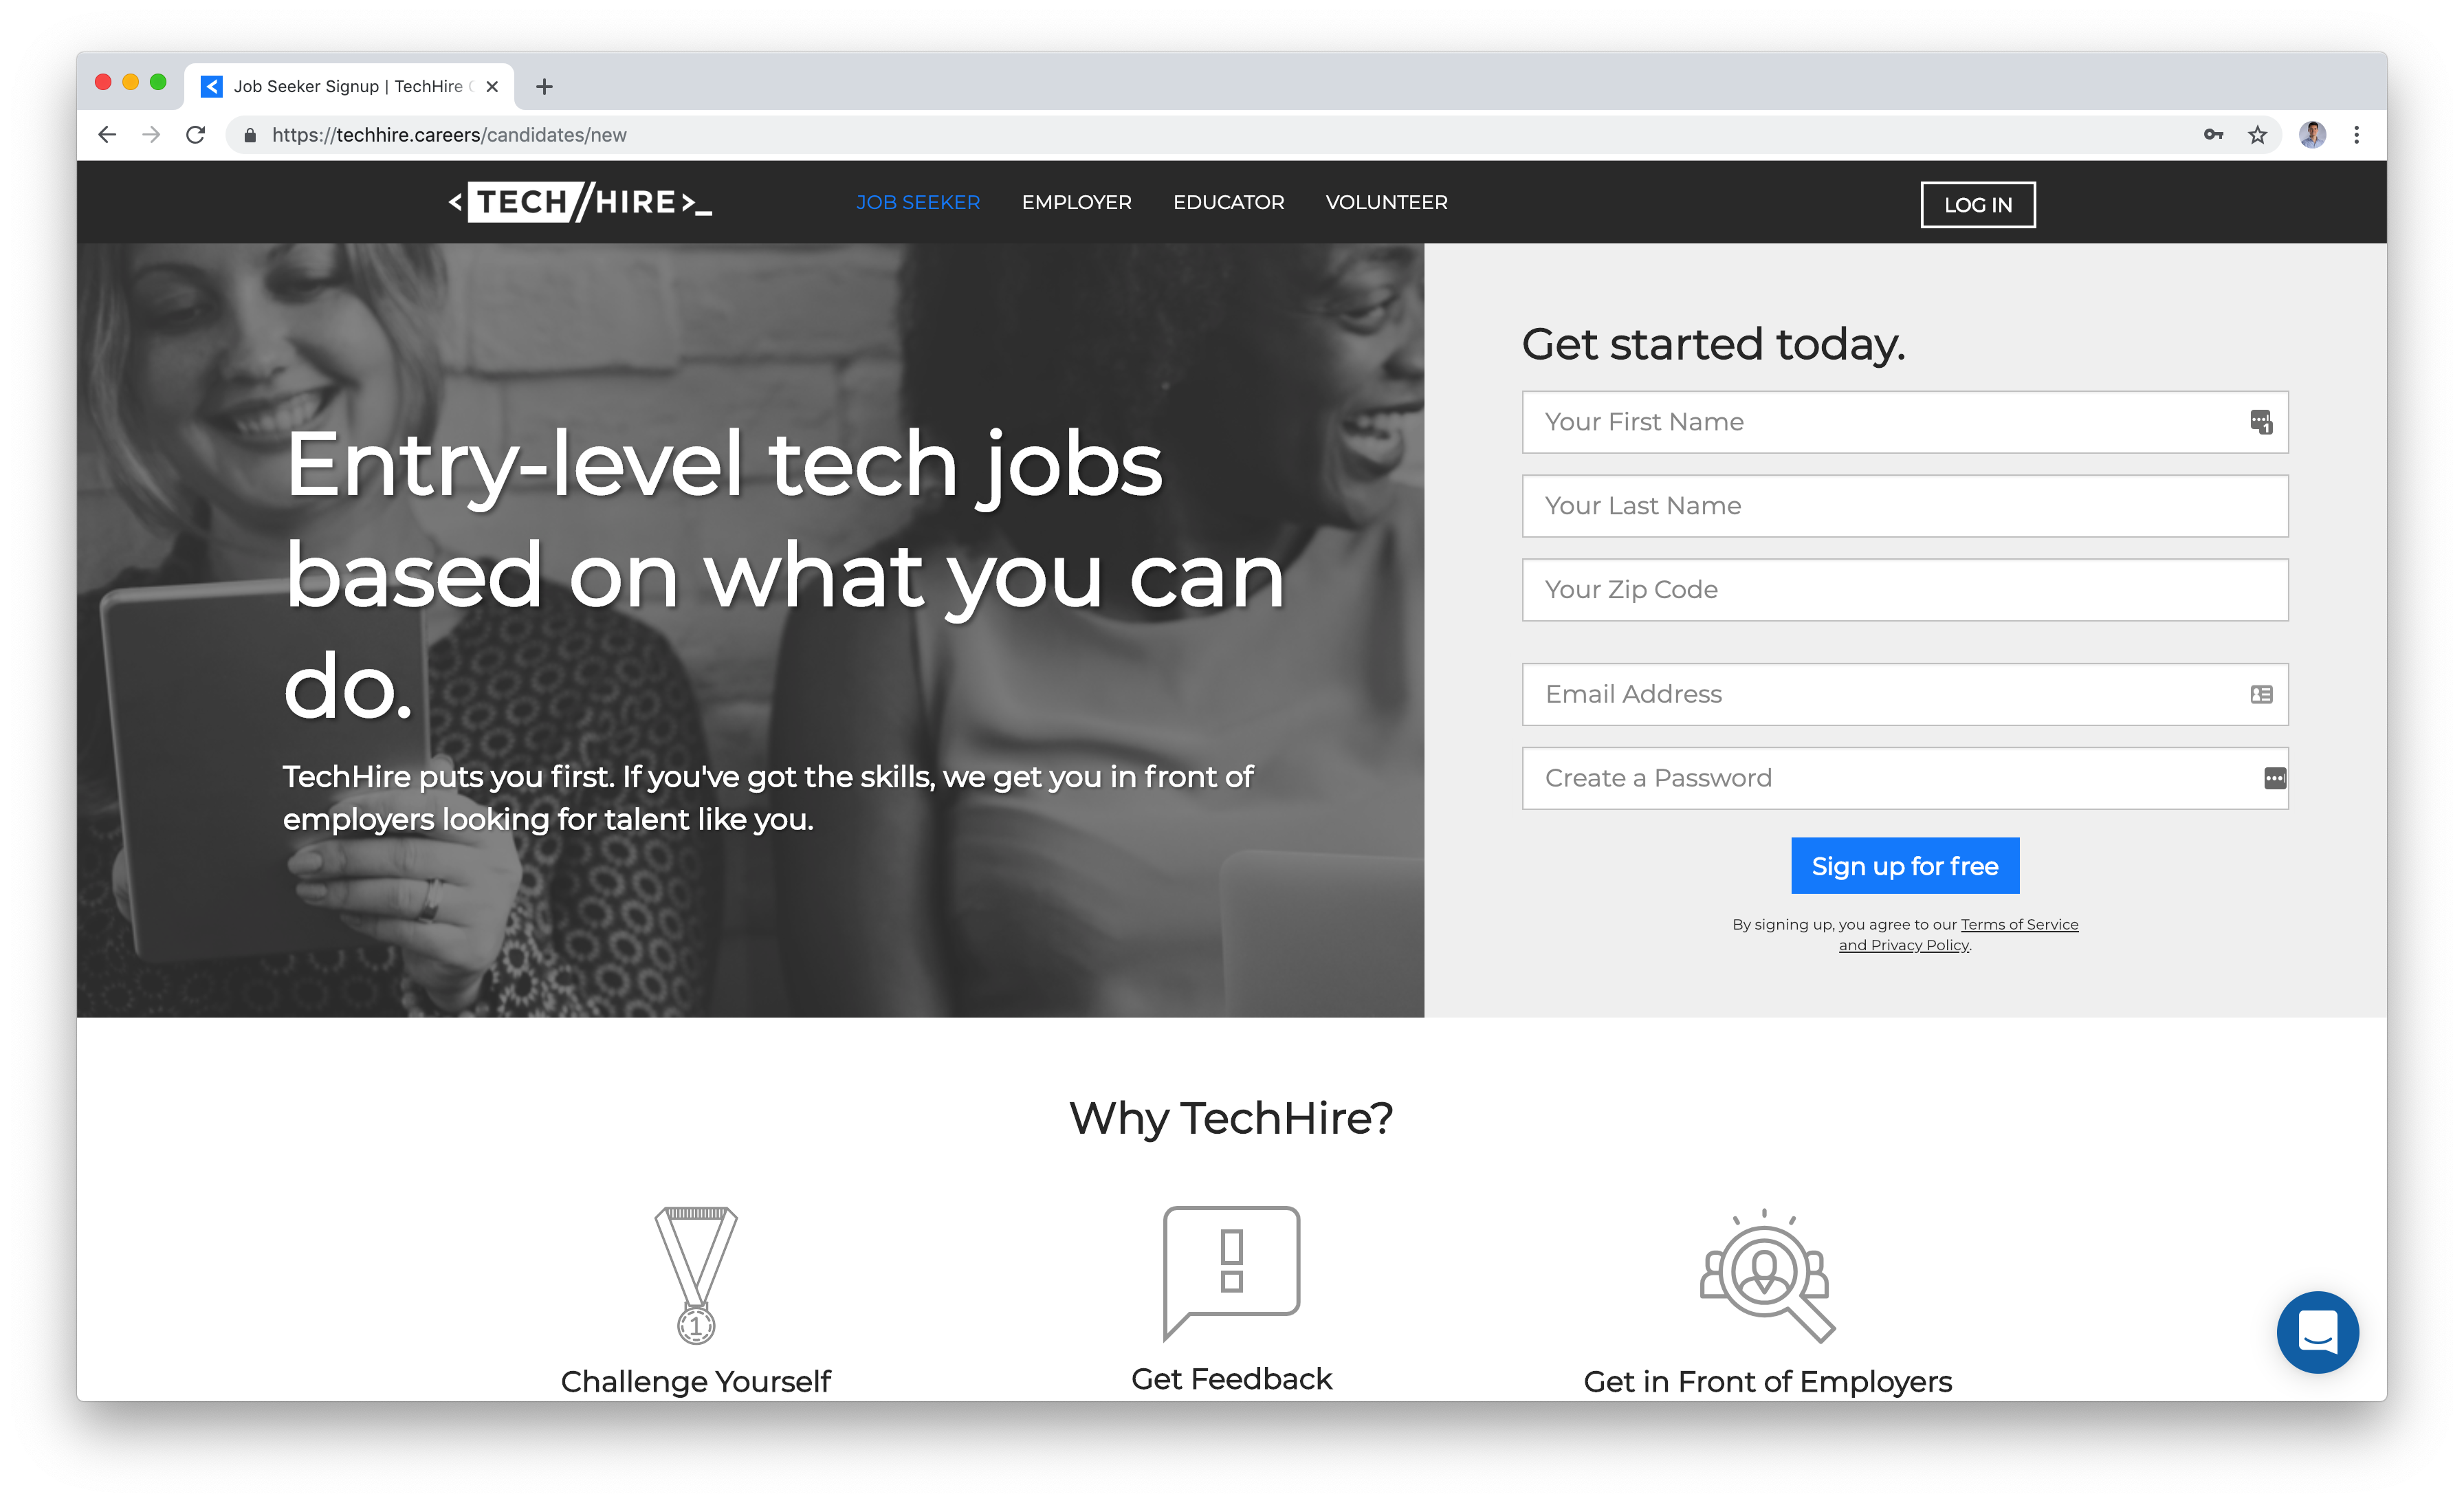 Sign up pages for job seekers